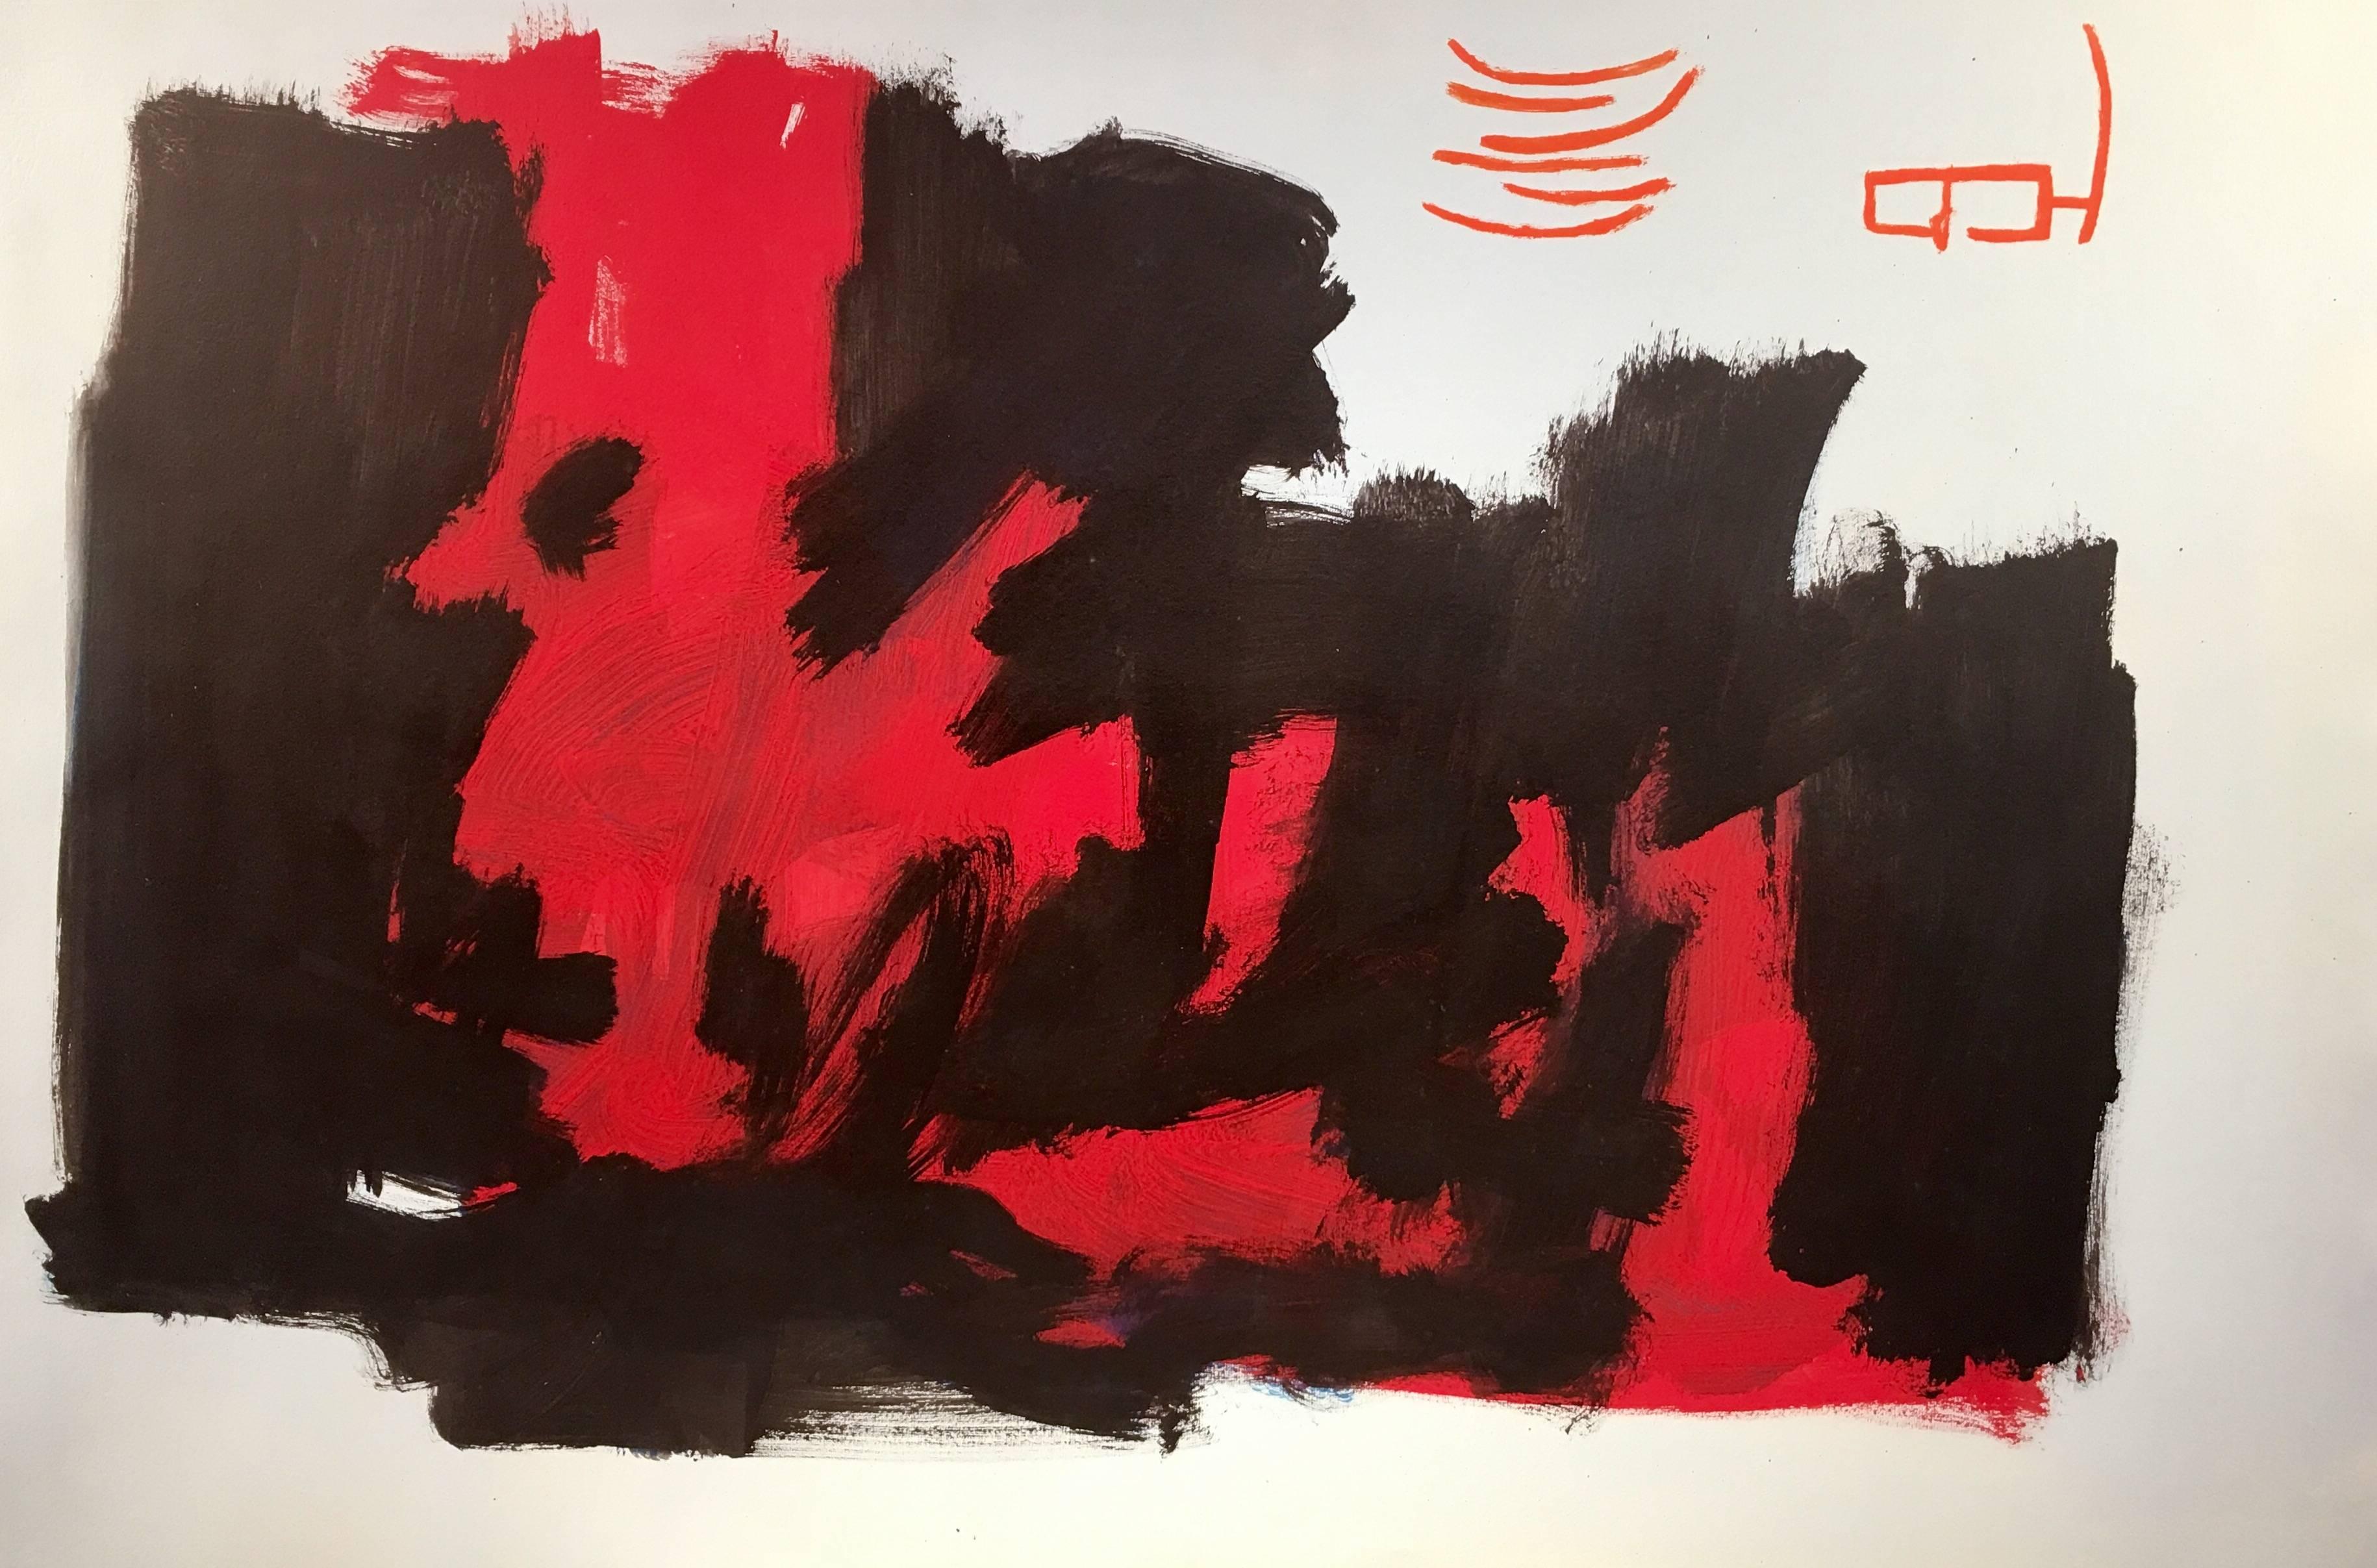 RAFAEL RUZ Abstract Painting - Ruz    Red  Black  Interior Landscapes - Abstract Acrylic on paper Painting